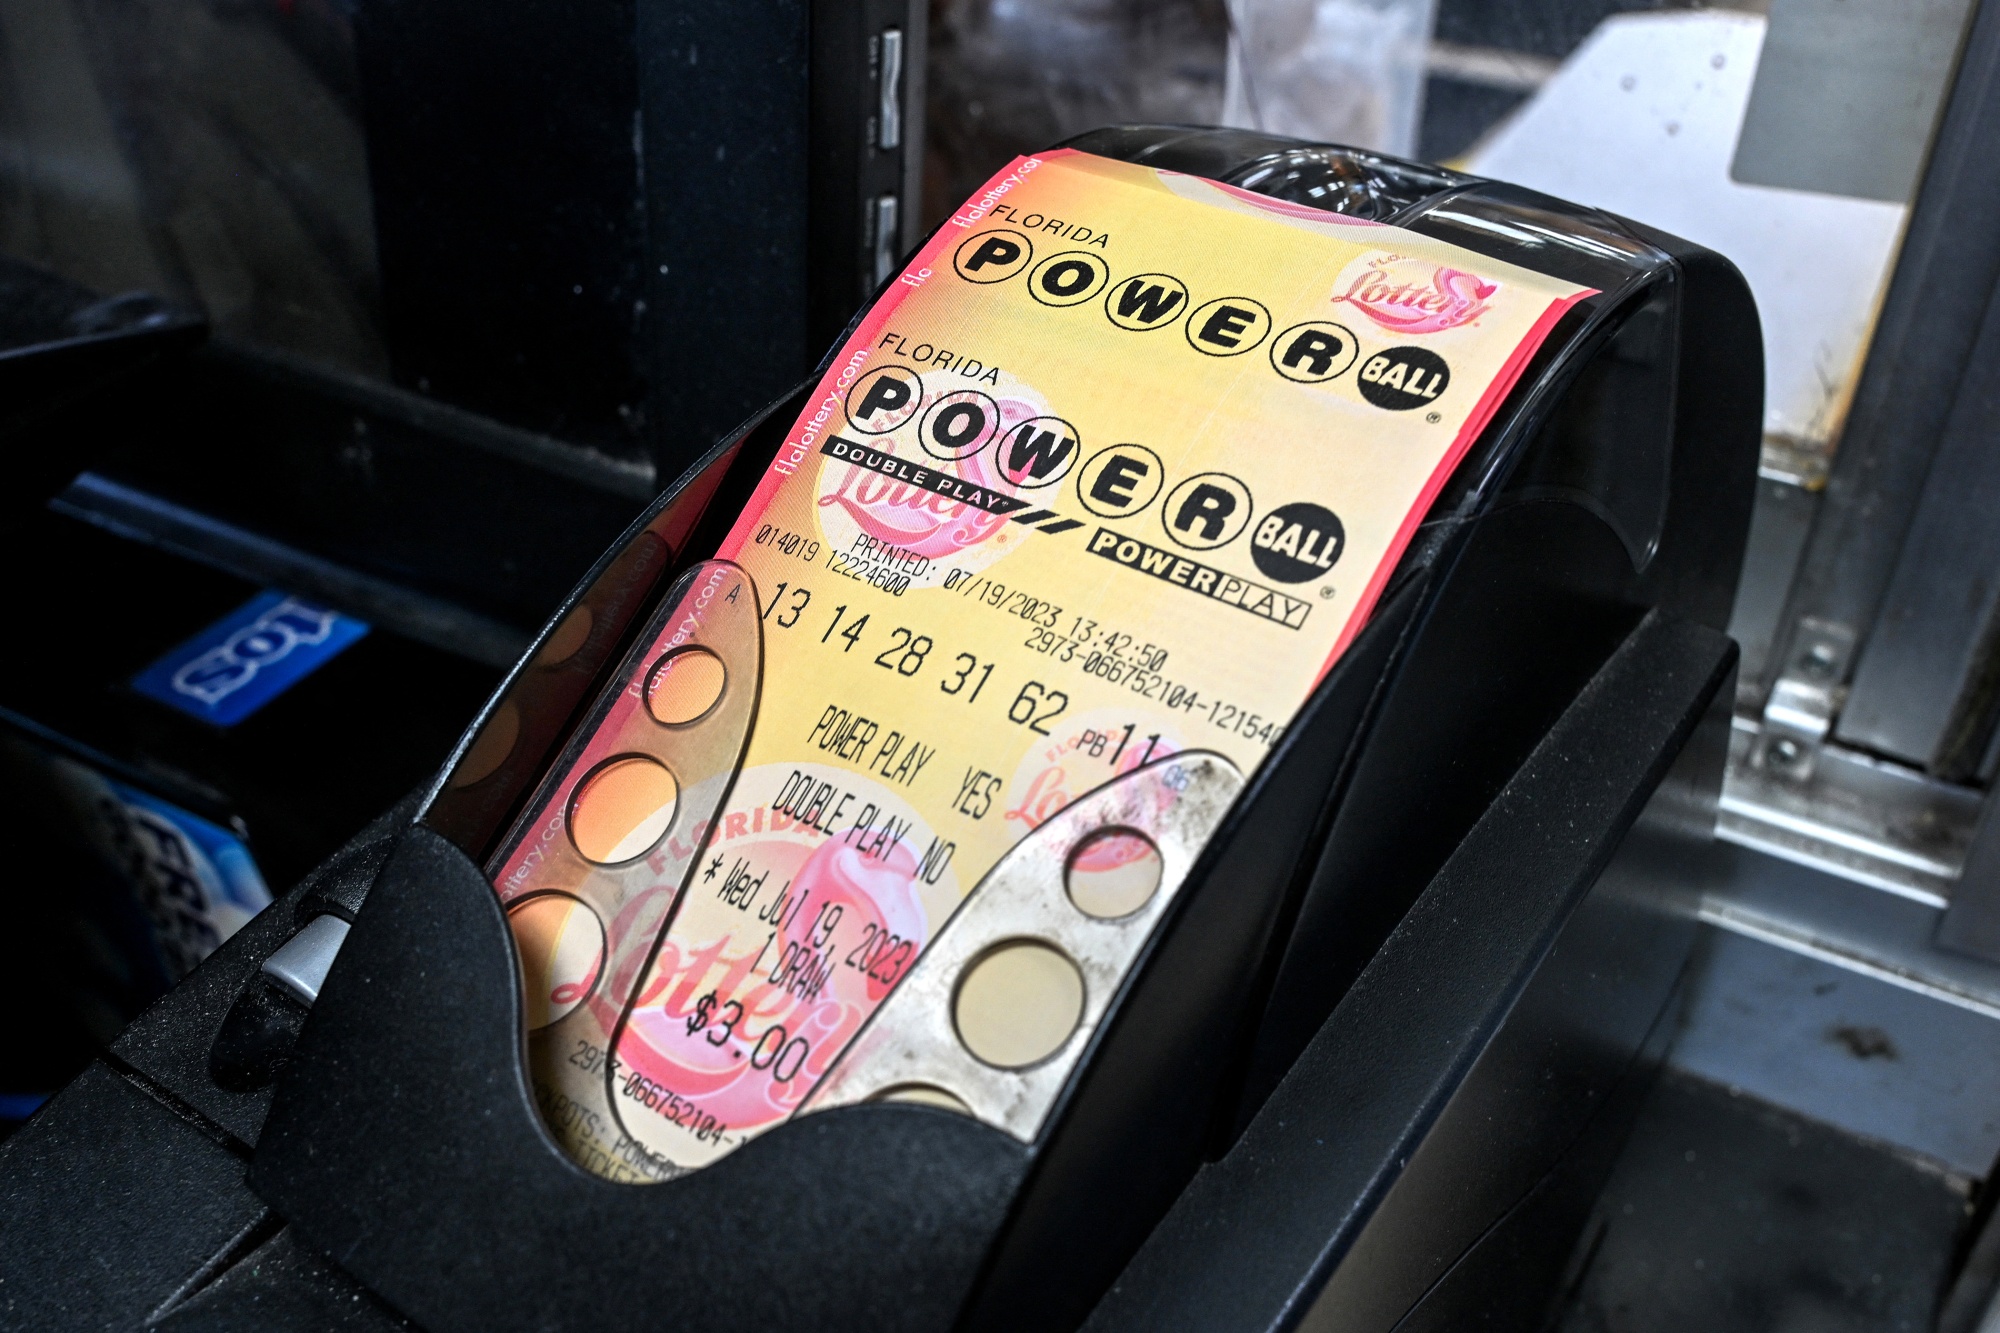 For only third time in 3 decades, Powerball jackpot reaches $1